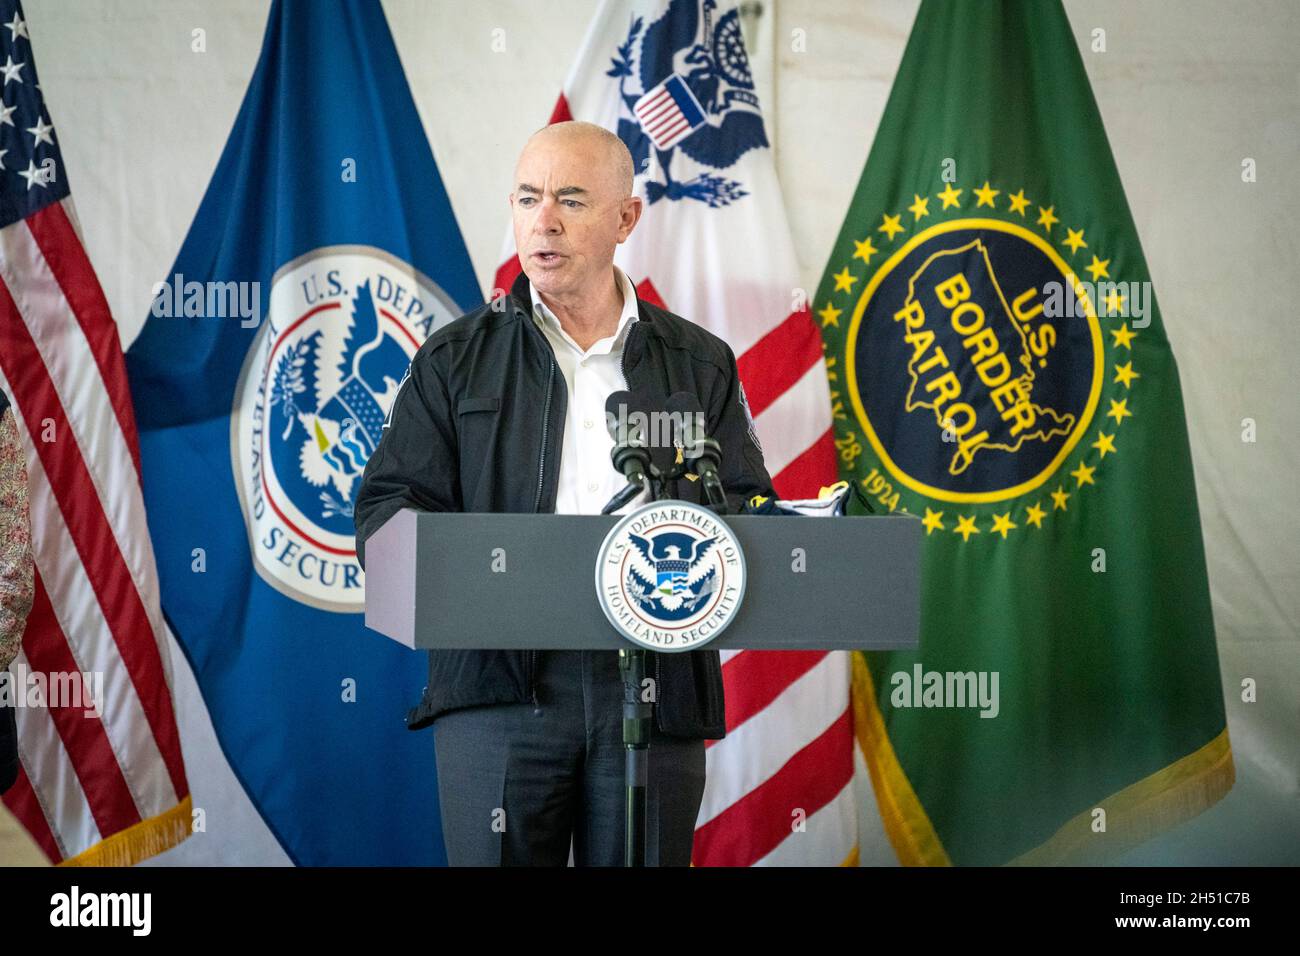 Donna, United States. 07 May, 2021. U.S Homeland Security Secretary Alejandro Mayorkas delivers remarks after touring the the Customs and Border Patrol immigration processing center May 7, 2021 in Donna, Texas.  Credit: Zachary Hupp/Homeland Security/Alamy Live News Stock Photo